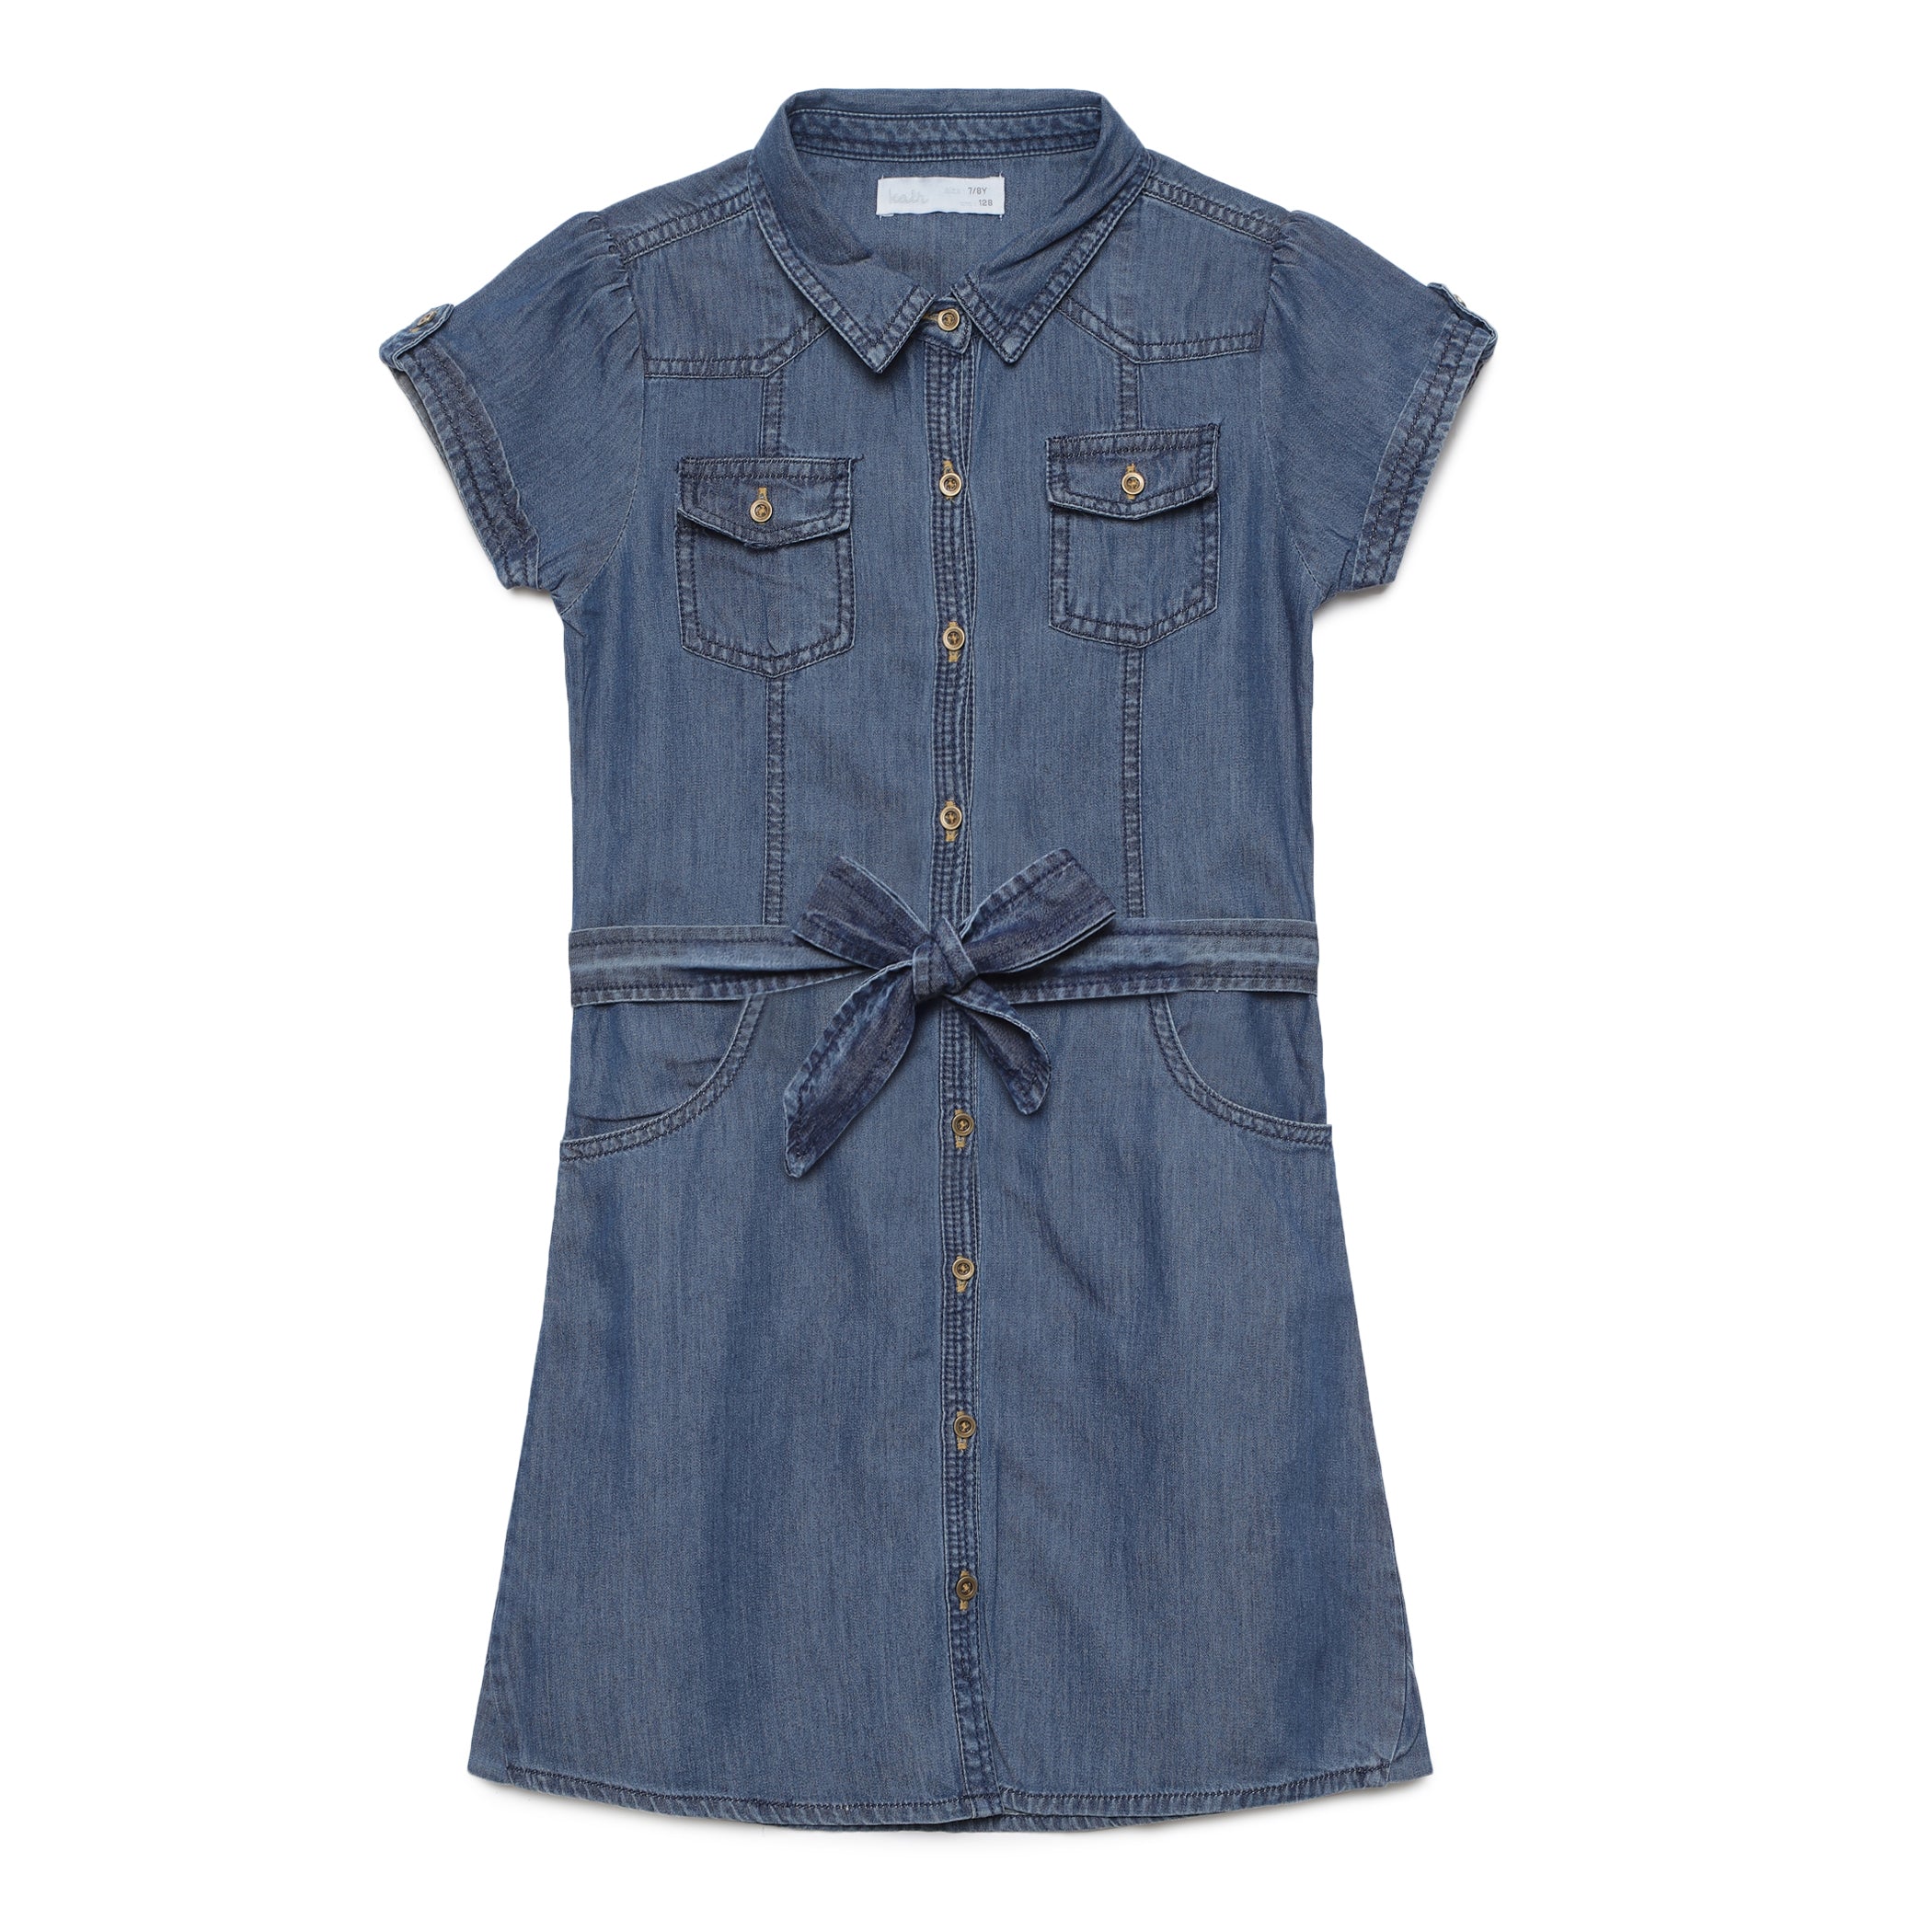 Kids Girls Denim Dress Set Solid Color Long Sleeves Button Down Shirt Dress  with PU Leather Camisole Corset Outfit | Unilovers